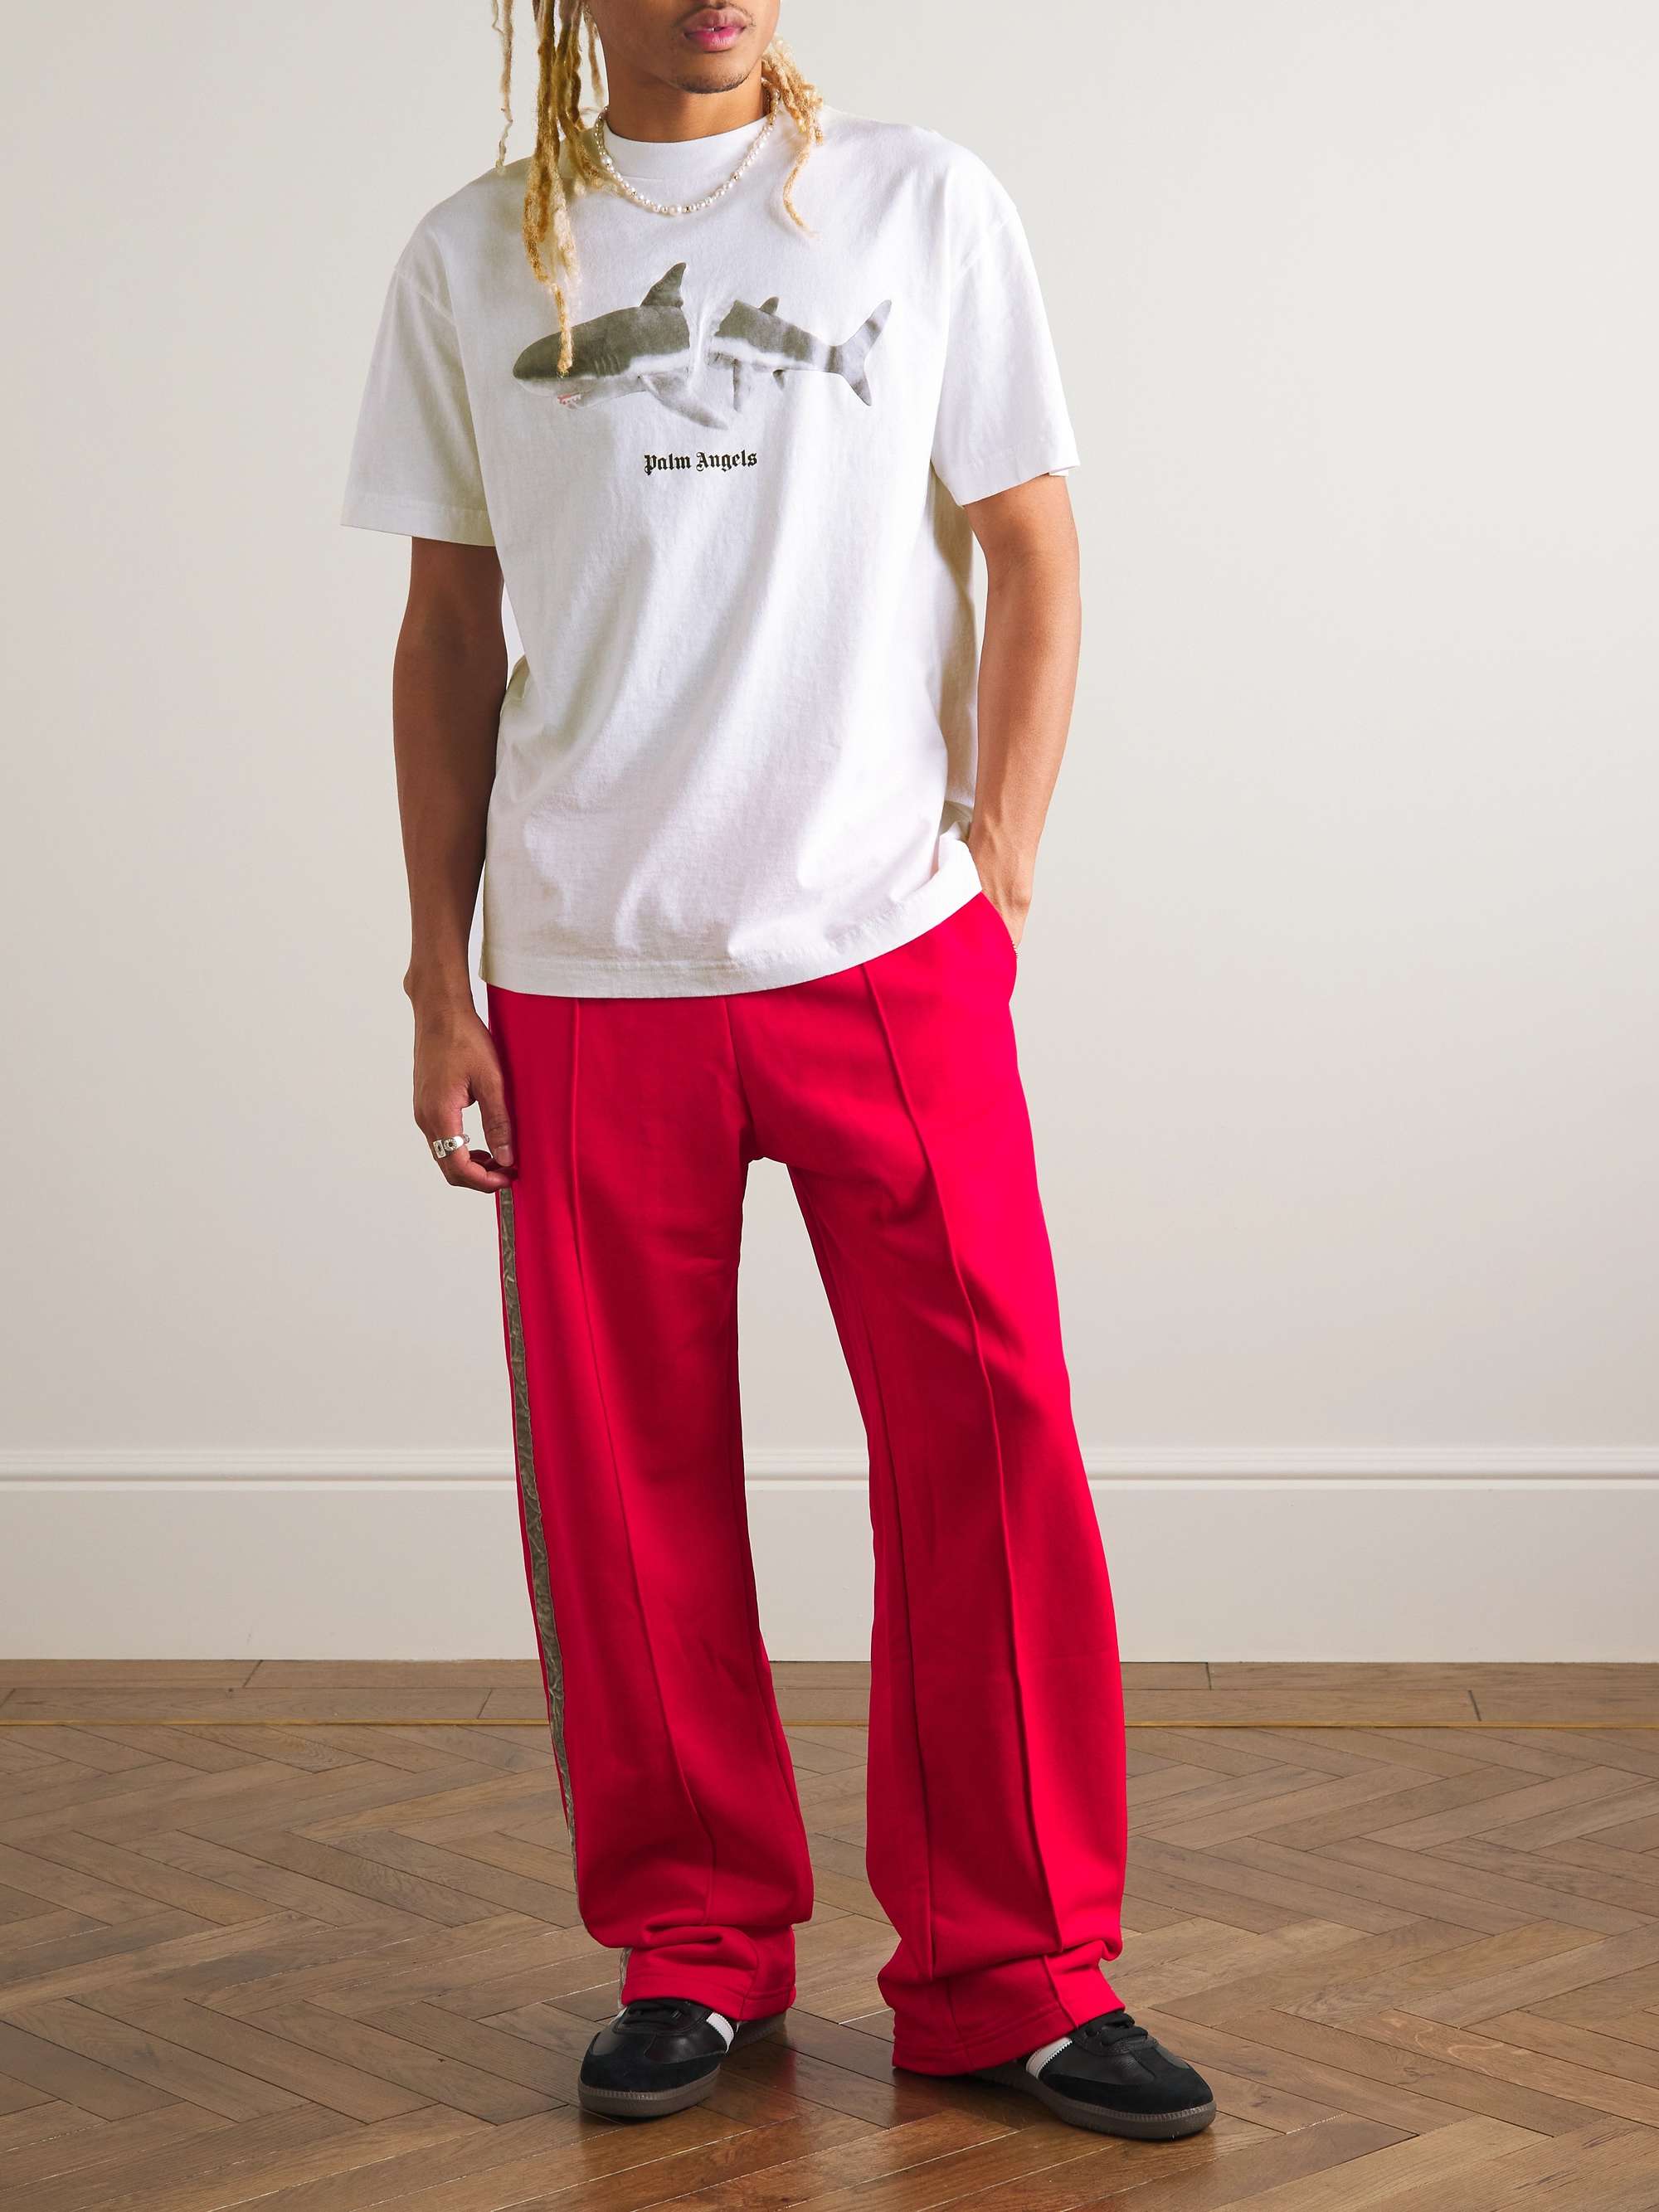 Palm Angels California Oversized T-Shirt White & Red